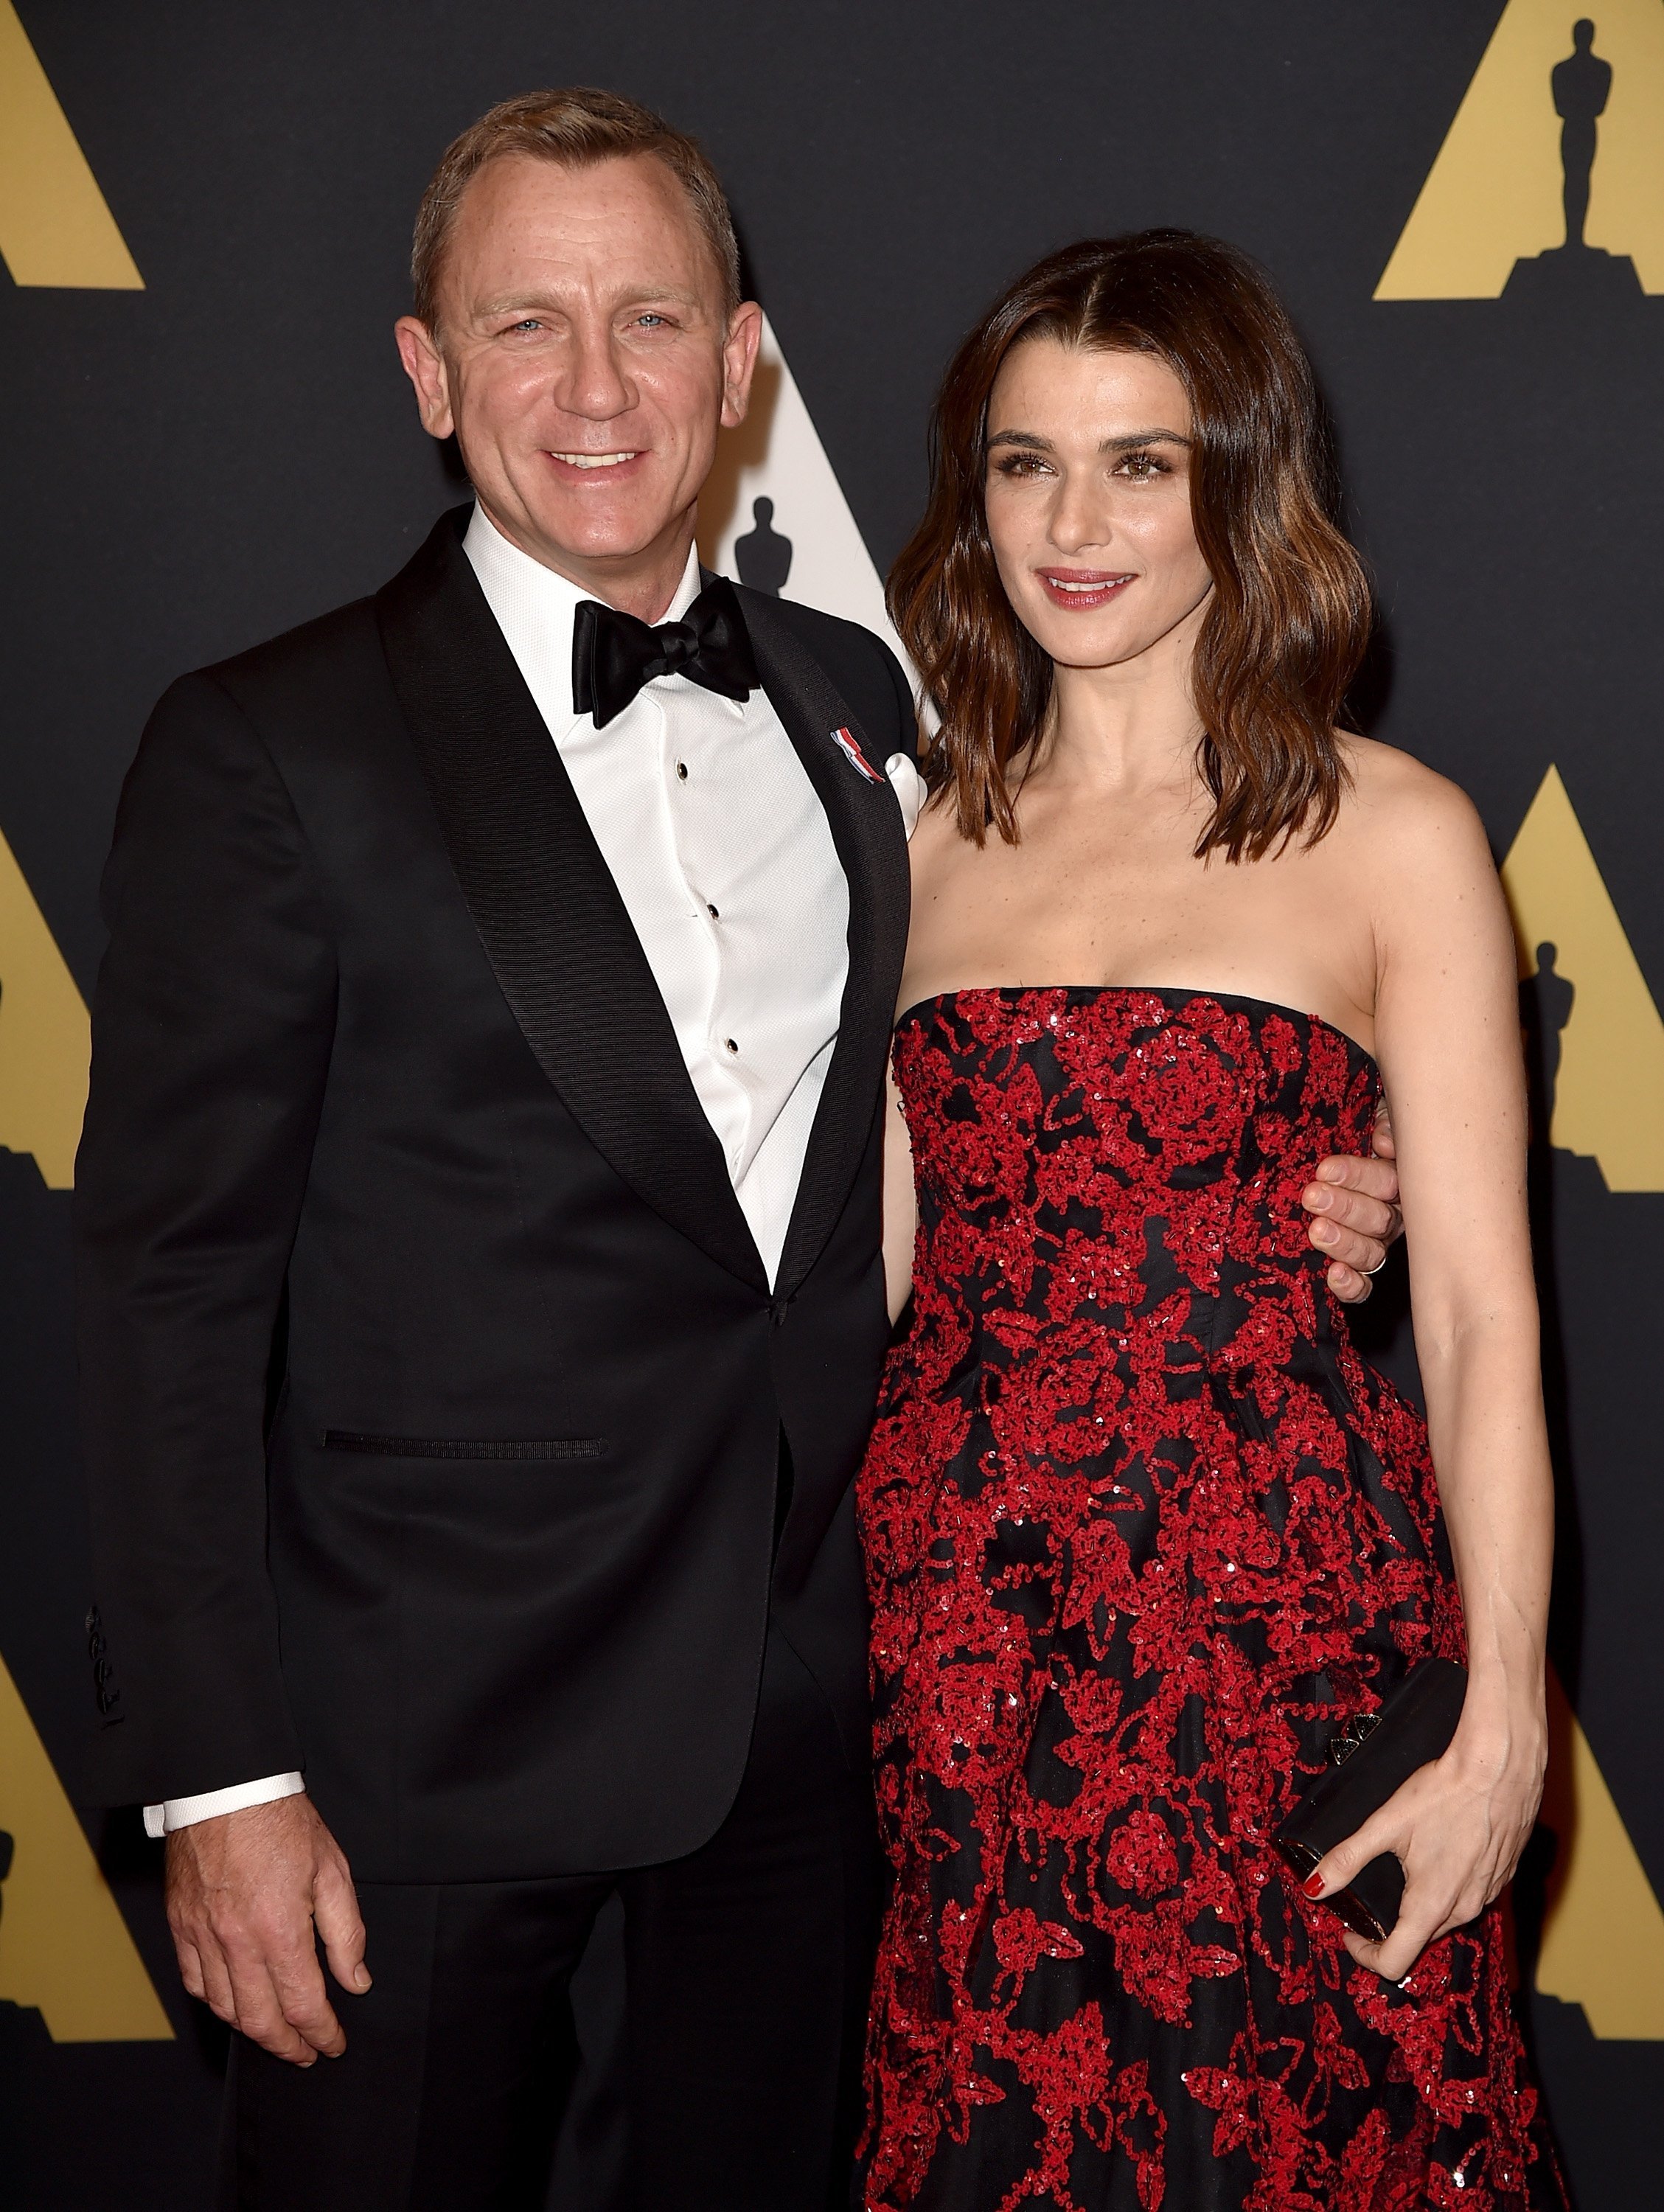 Daniel Craig and Rachel Weisz attend the Academy of Motion Picture Arts and Sciences' 7th annual Governors Awards on November 14, 2015 in Hollywood, California. | Source: Getty Images.